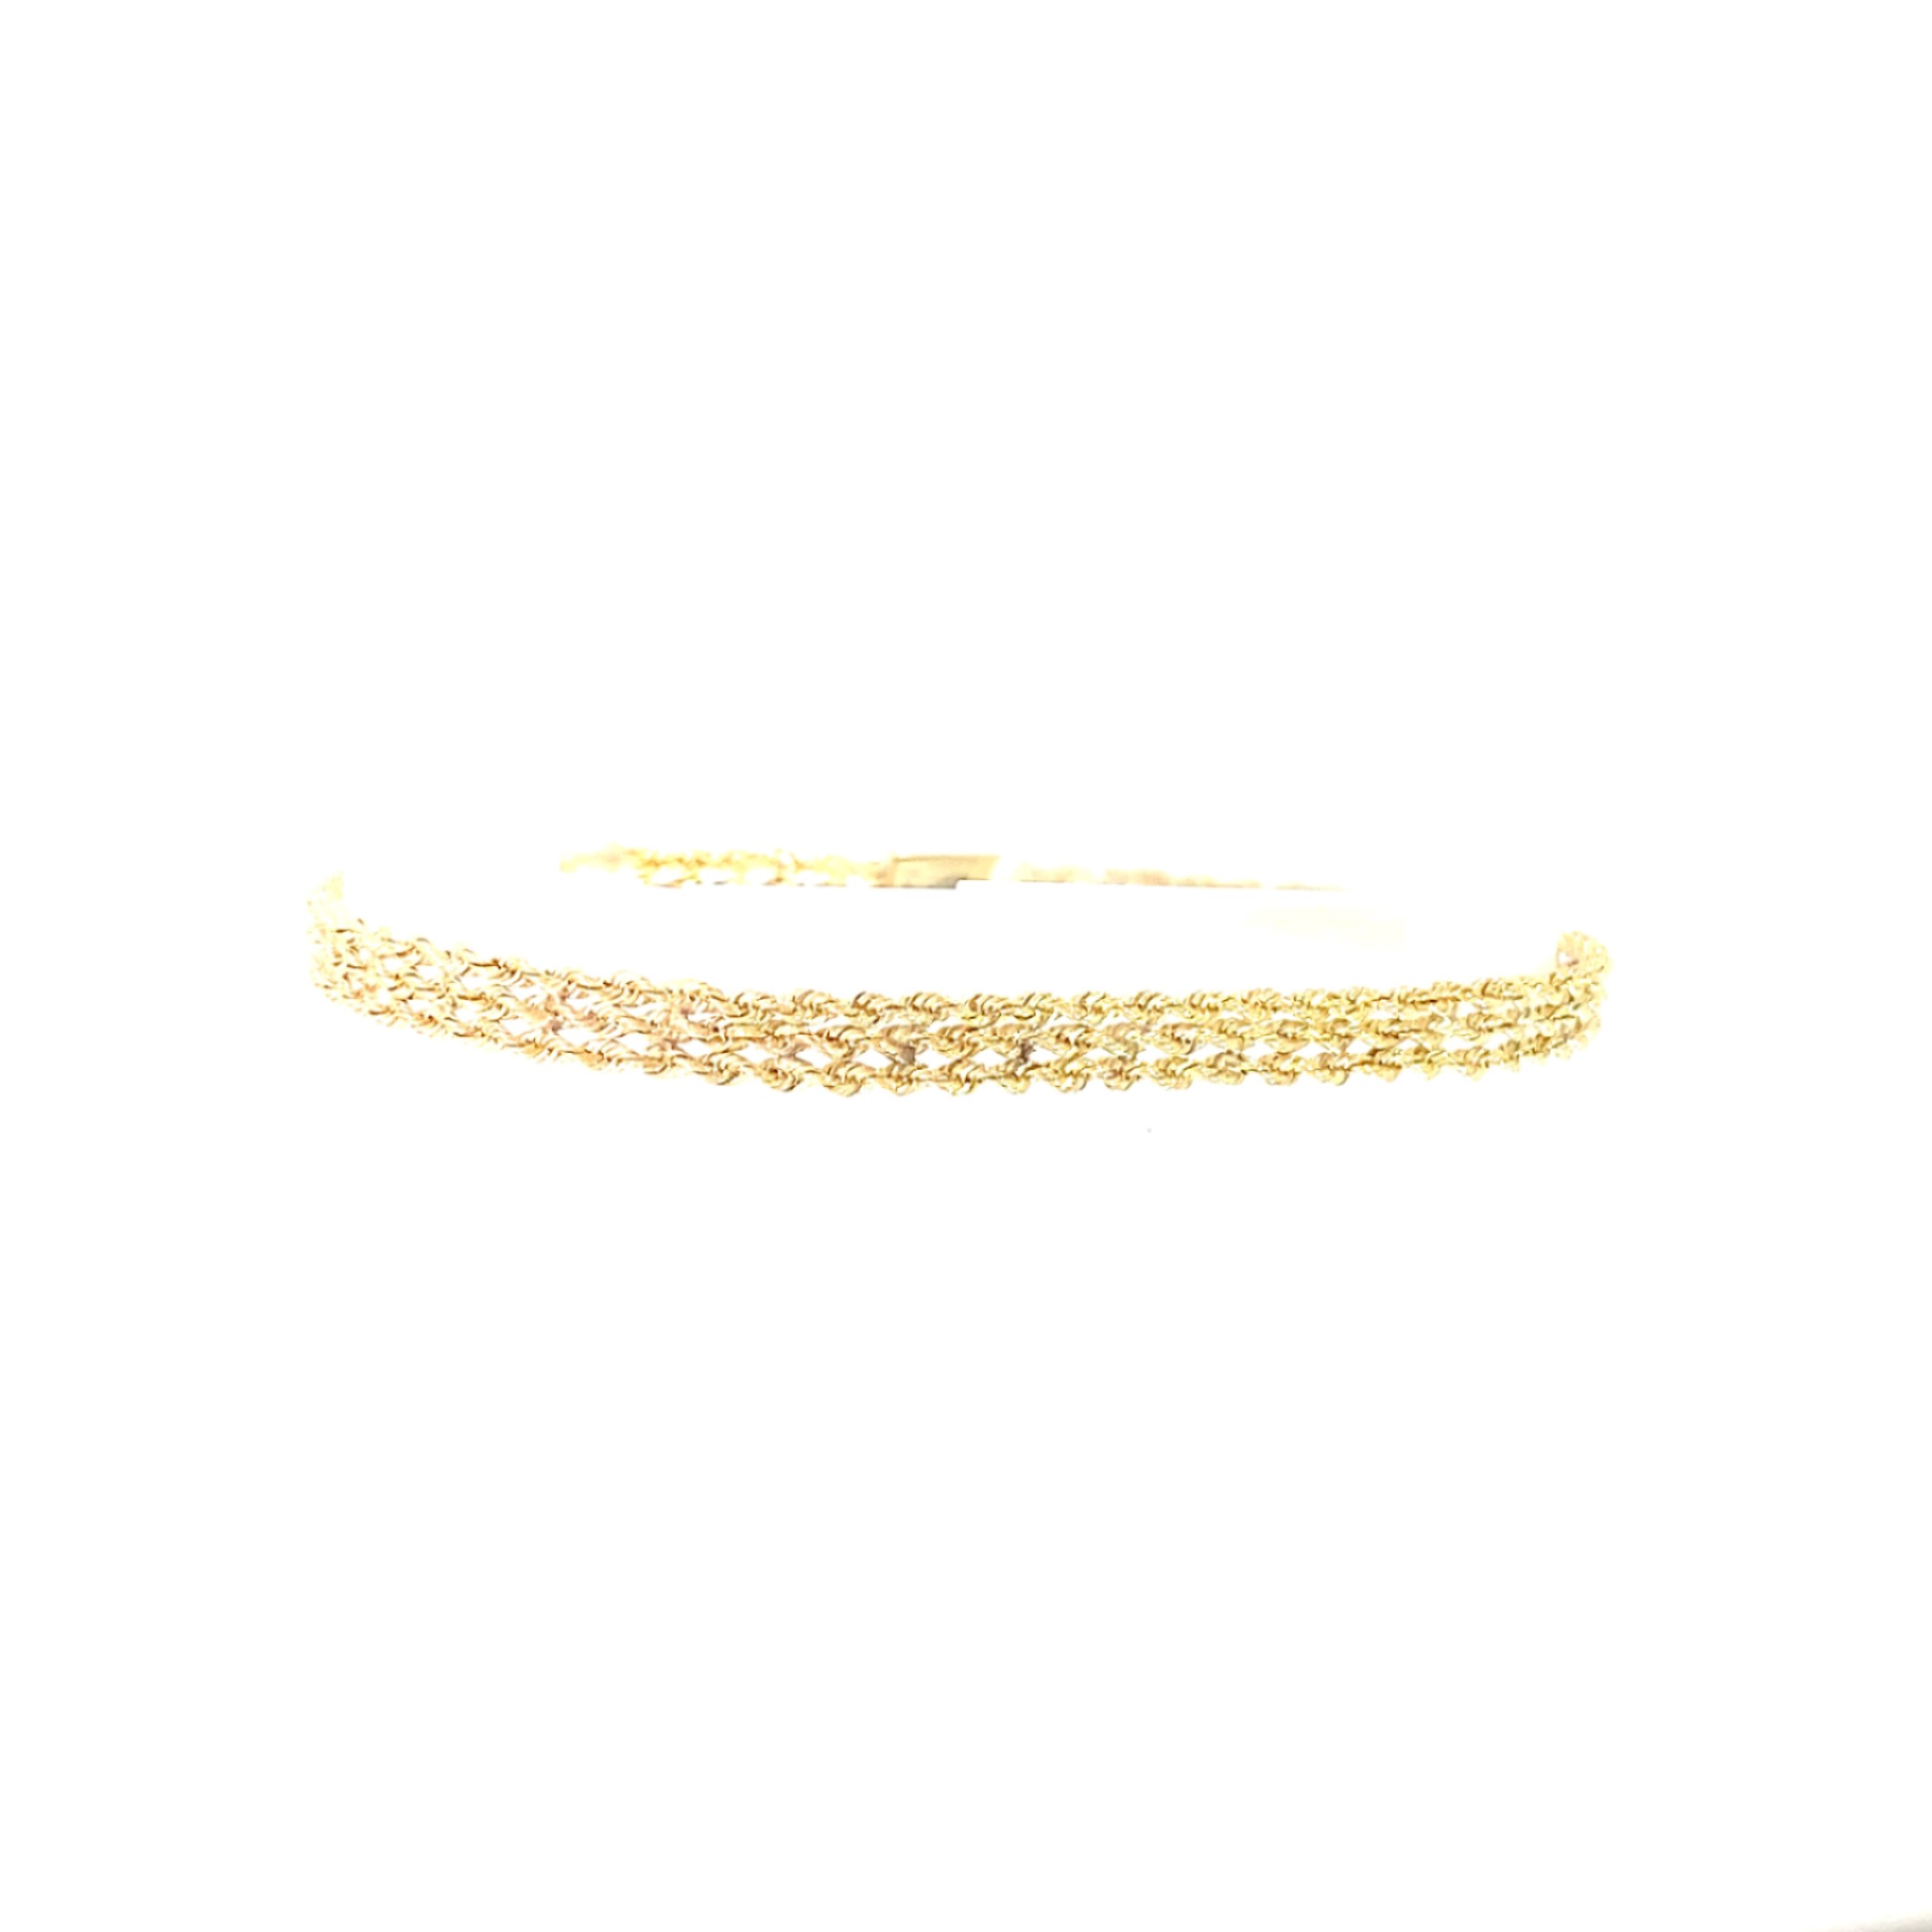 Estate 14 Karat Yellow Gold 3 Row Rope Bracelet Measuring 7 Inches And Having A Tongue And Groove Clasp